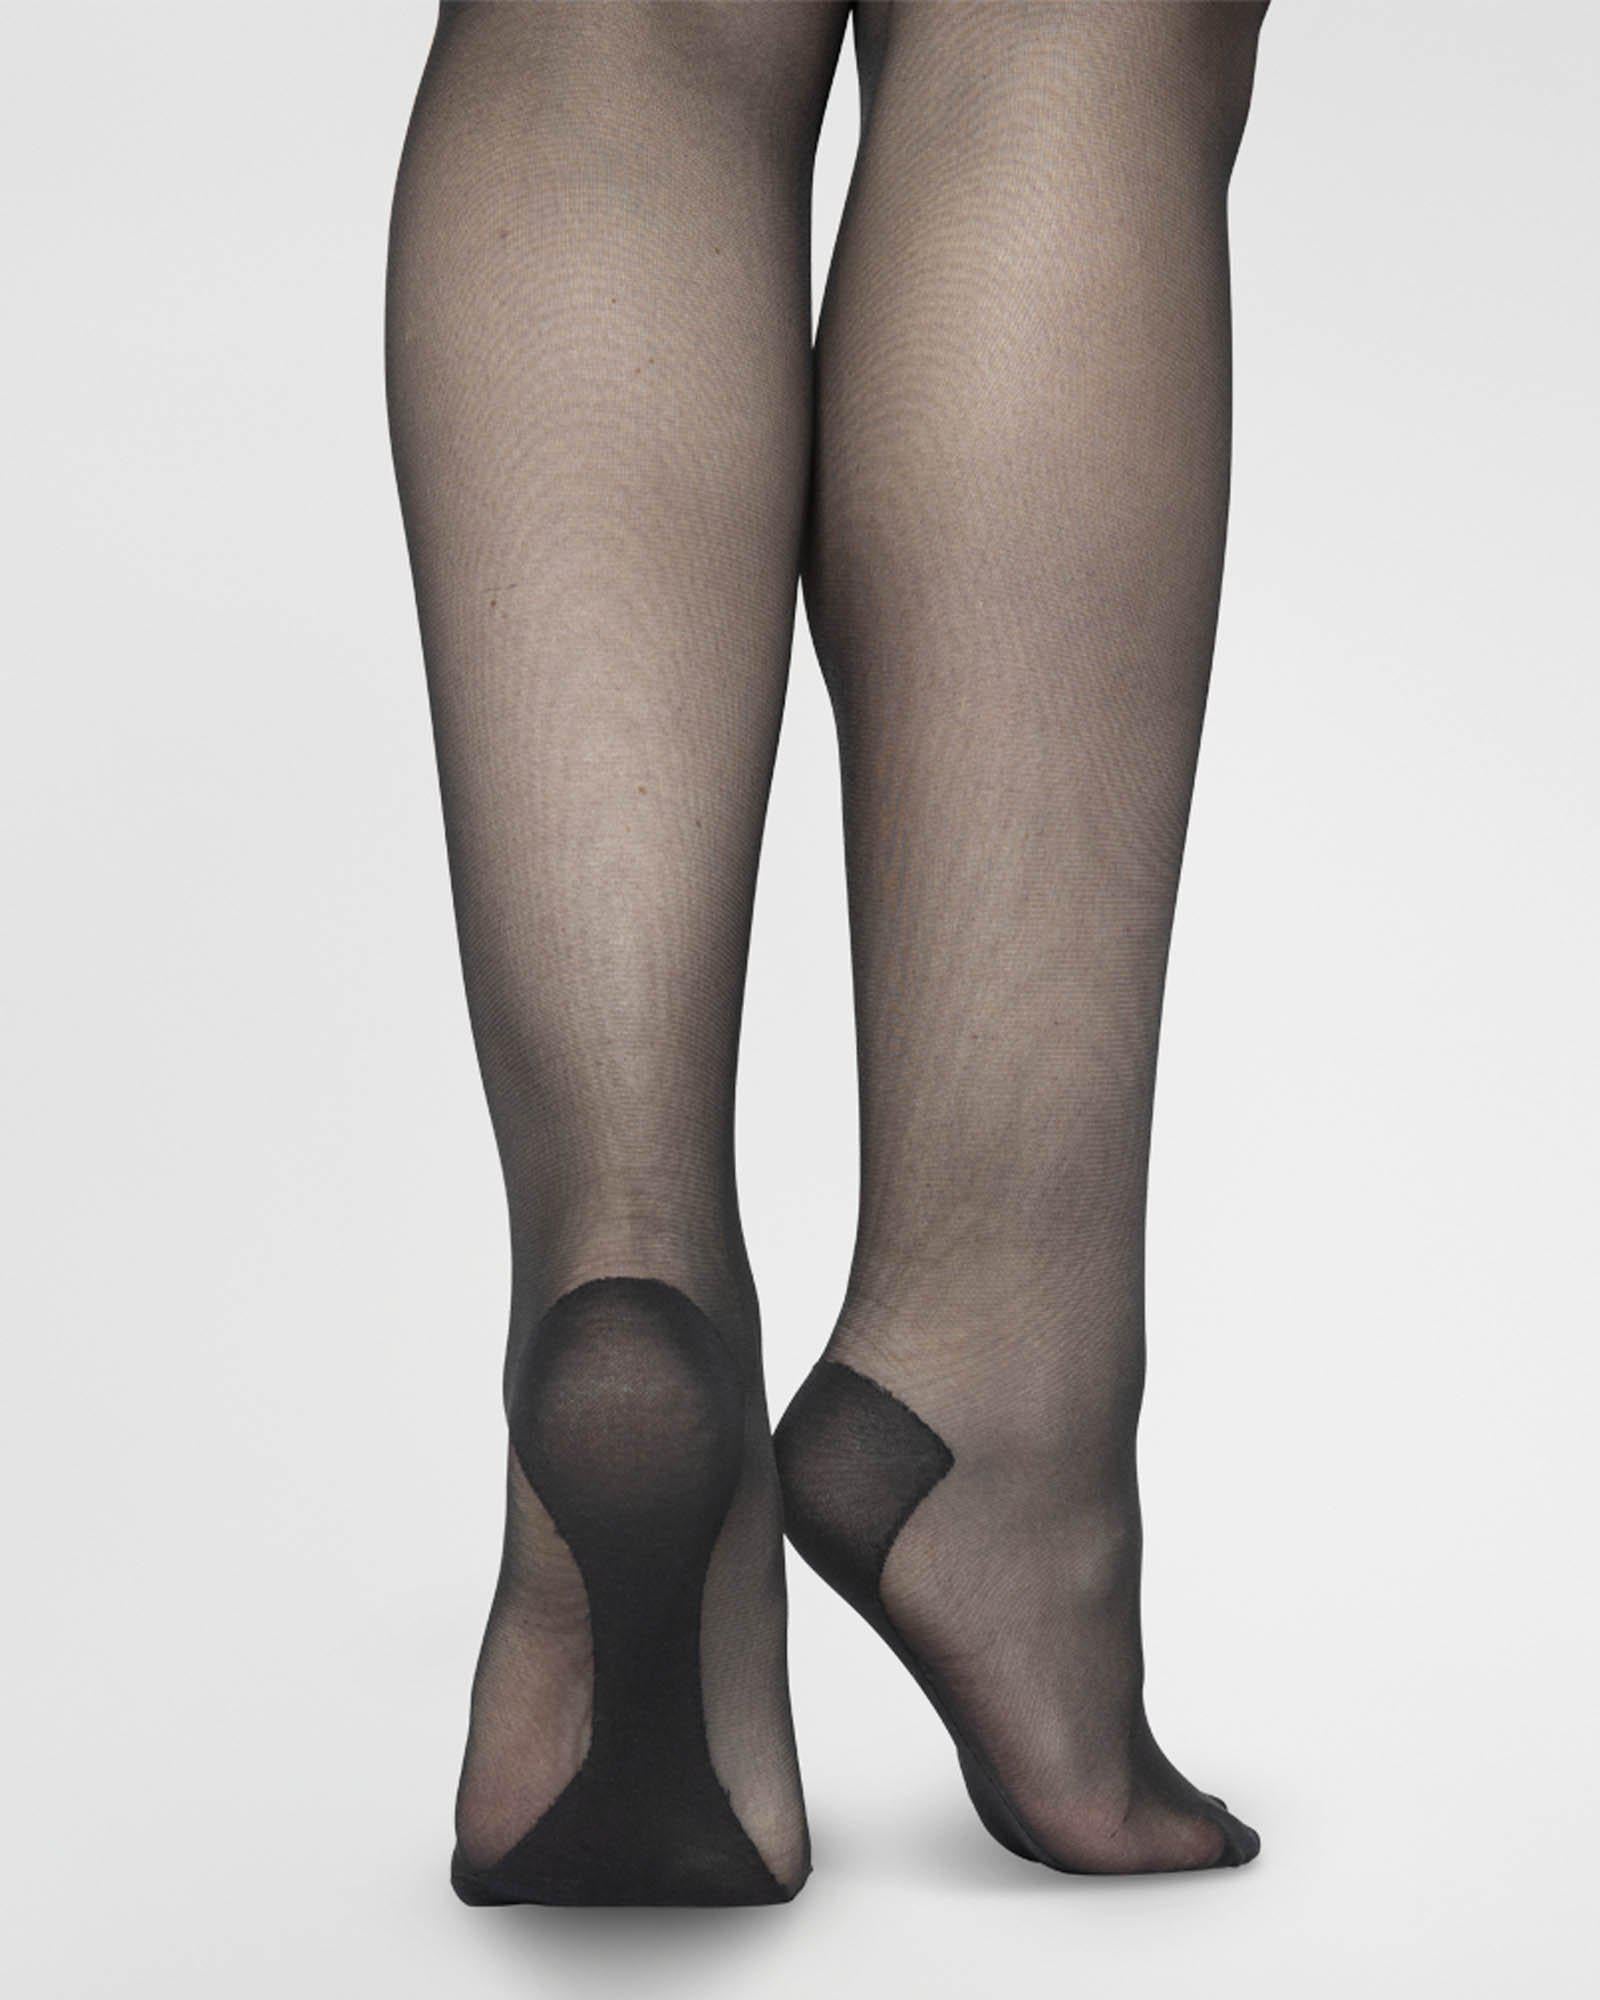 What is the difference between pantyhose, tights, and stockings